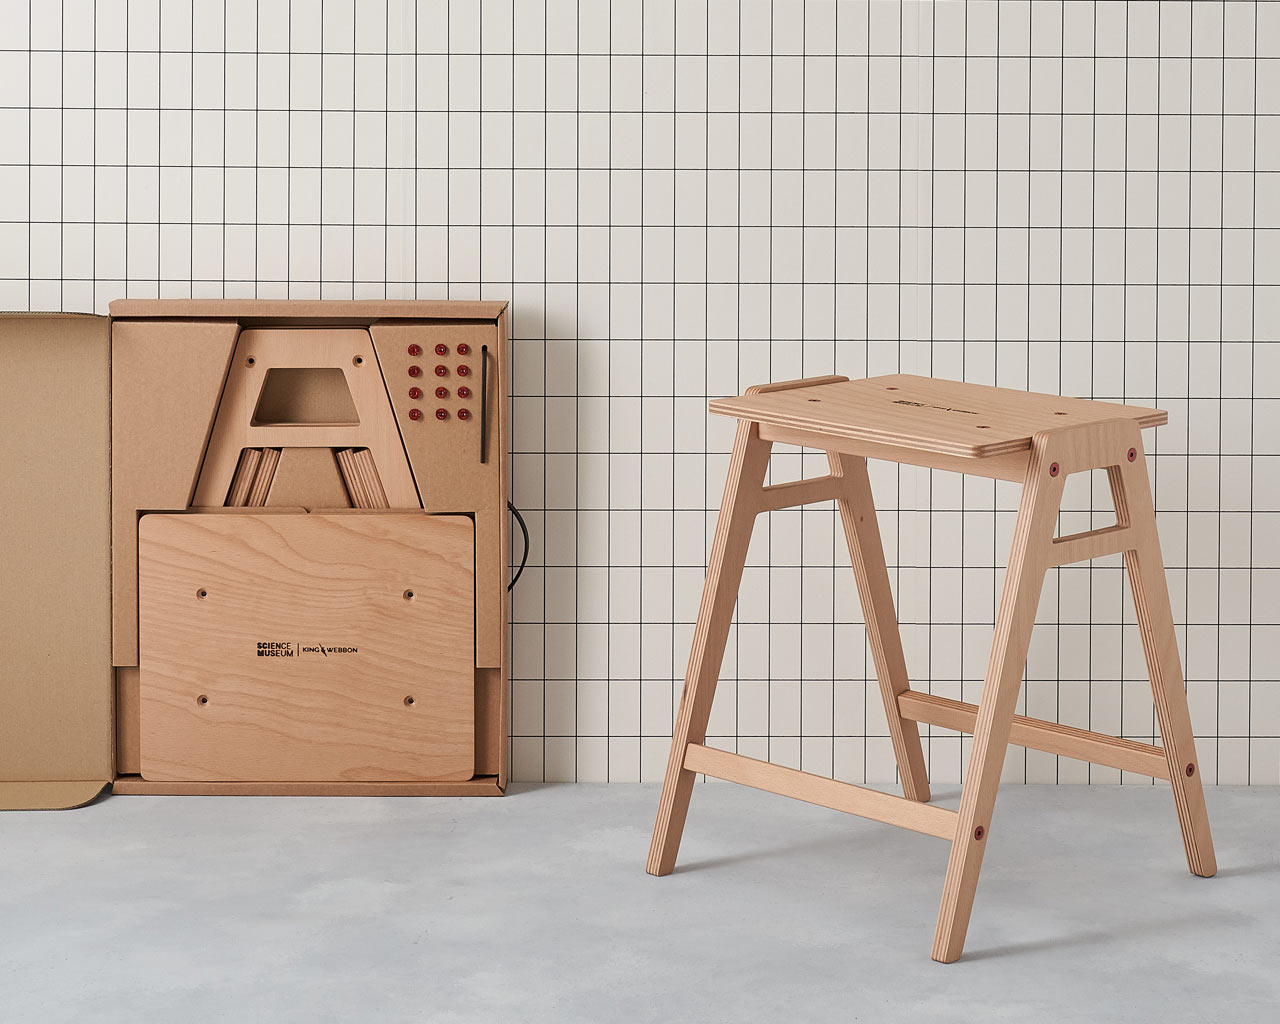 The Stackable, Flat-Pack Lab Stool by King & Webbon